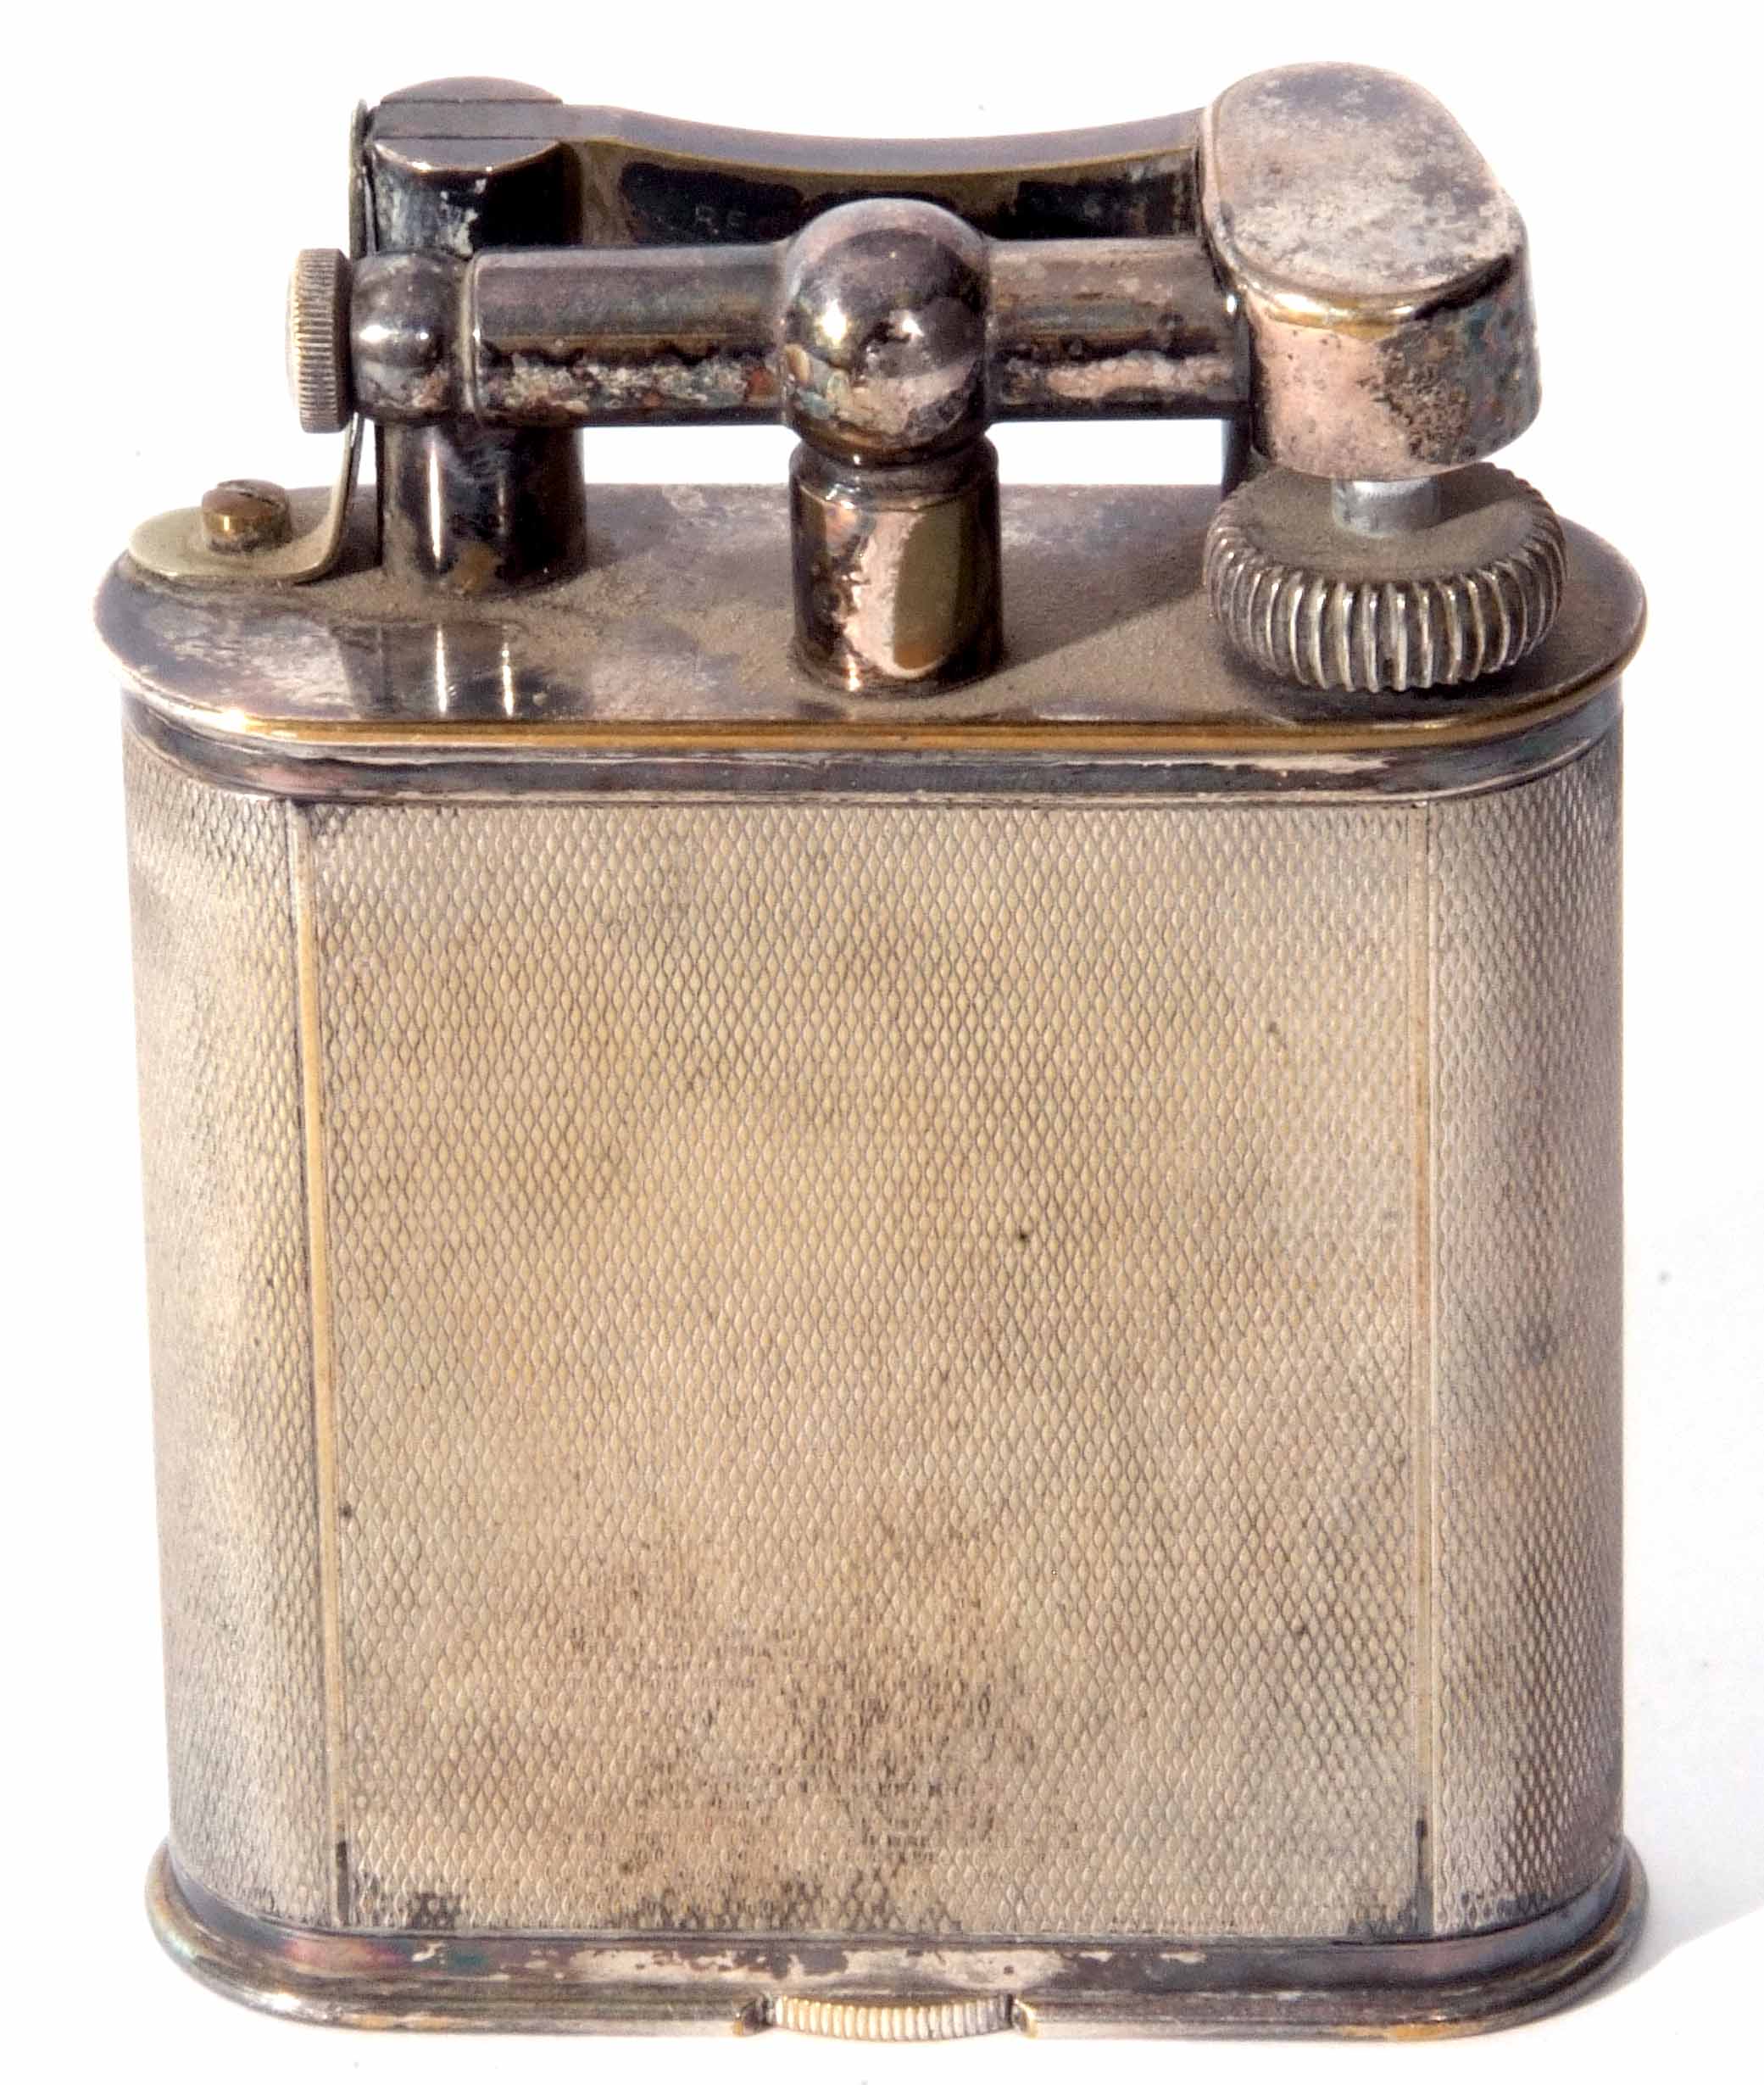 Mid-20th century electro-plated table lighter, Dunhill, patent no 143752, square body with all - Image 2 of 2